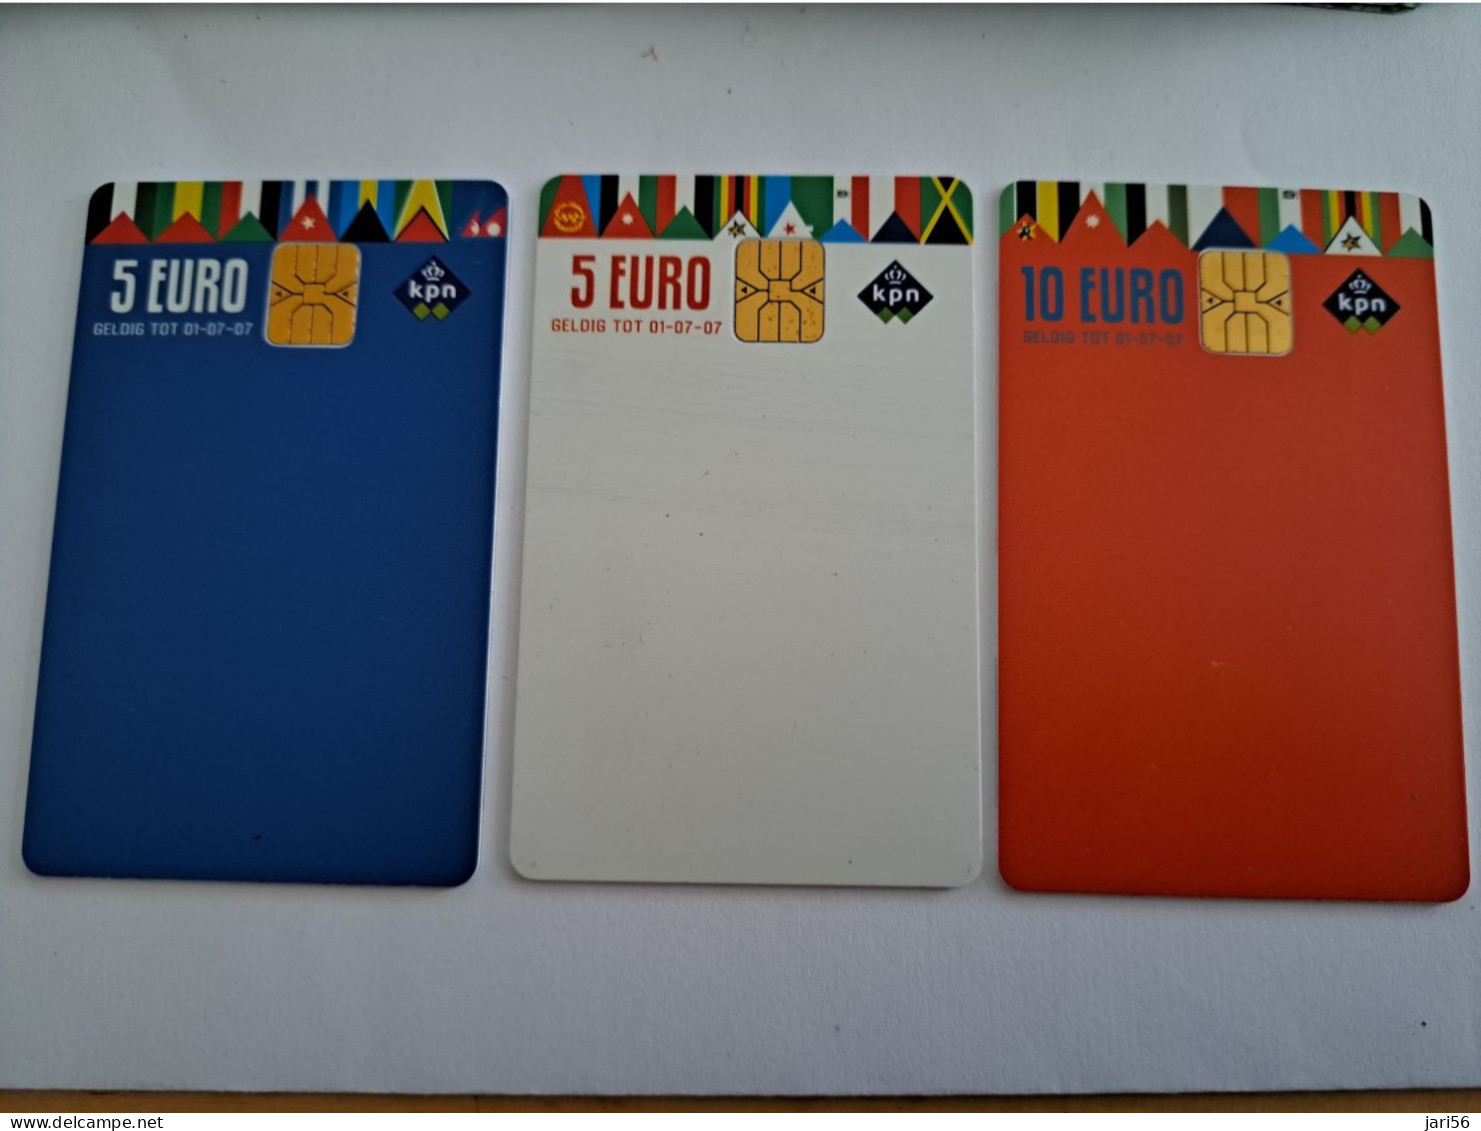 NETHERLANDS CHIPCARD  2X CARD  5 EURO / 1X 10 EURO /  FLAGS OF MANY COUNTRYS     /  USED   Cards  ** 15735 ** - Pubbliche